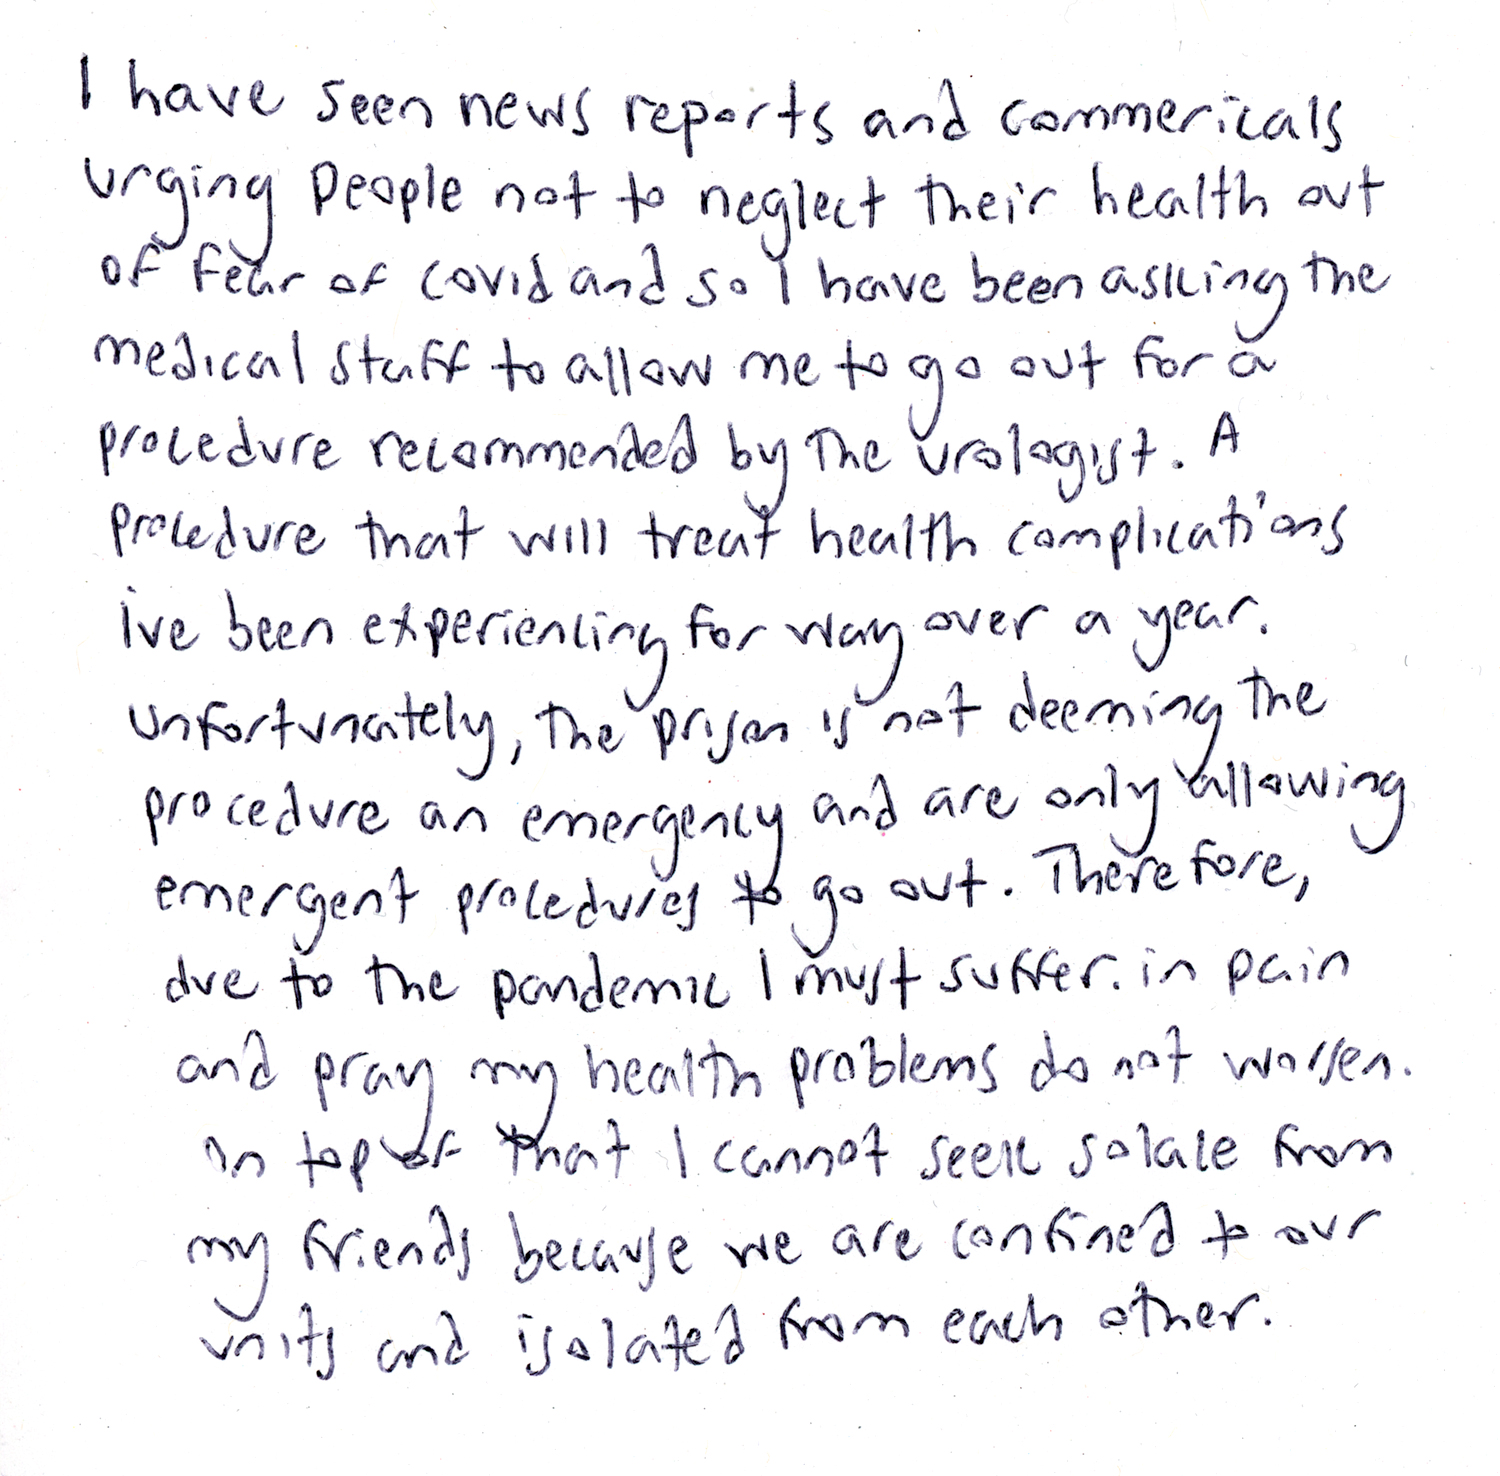 A handwritten note from Taylor: “I have seen news reports and commercials urging people not to neglect their health out of fear of covid and so I have been asking the medical staff to allow me to go out for a procedure recommended by the urologist—a procedure that will treat health complications I've been experiencing for way over a year. Unfortunately, the prison is not deeming the procedure an emergency and are only allowing emergent procedures to go out. Therefore, due to the pandemic I must suffer in pain and pray my health problems do not worsen. On top of that I cannot seek solace from my friends because we are confined to our units and isolated from each other.”